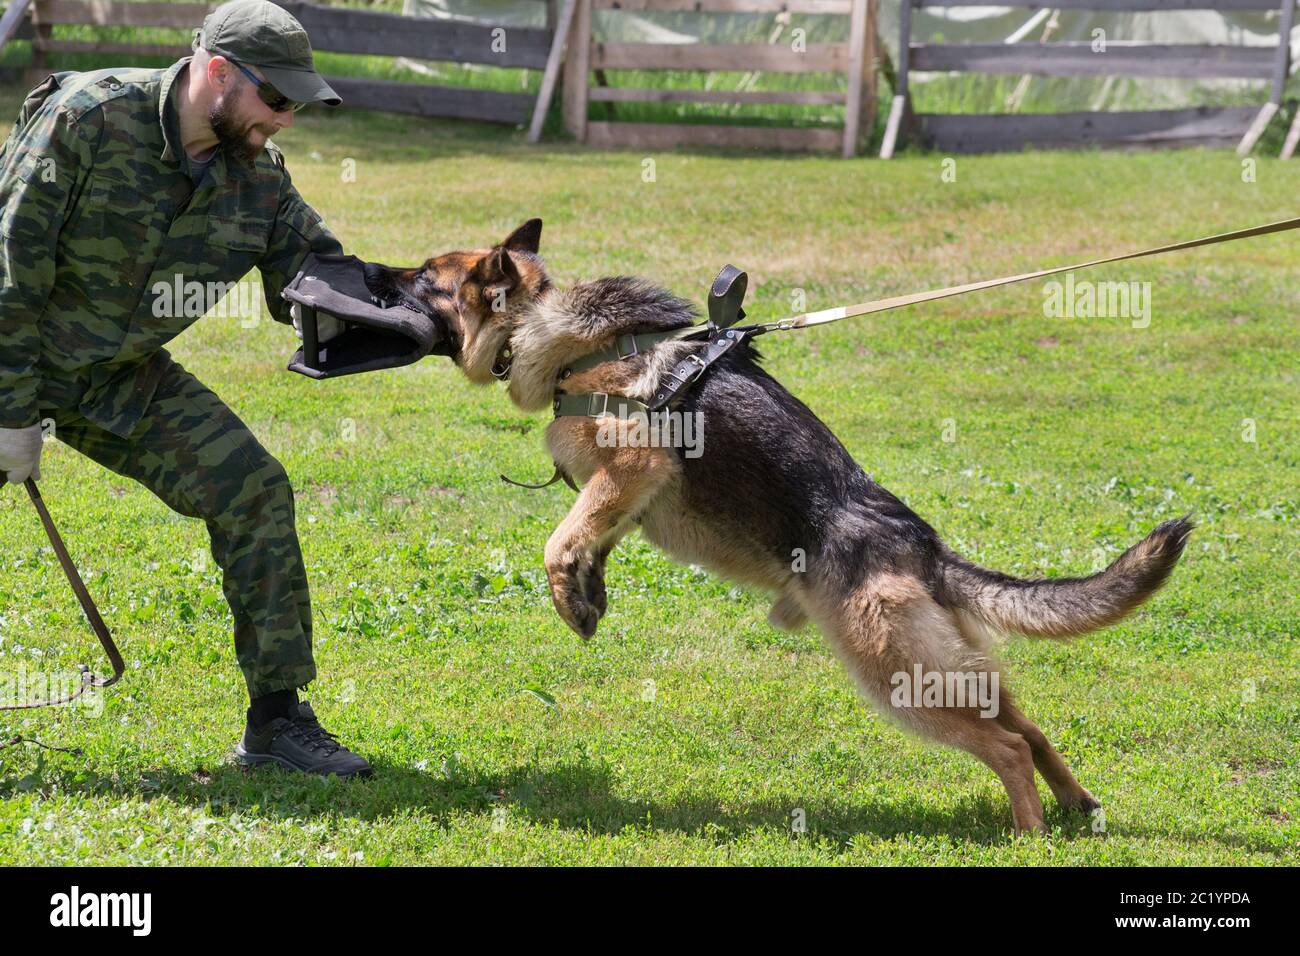 Russia, Izhevsk - June 14, 2020: Training a german shepherd dog in  cynological club. Attack demonstration. Dog training course Stock Photo -  Alamy